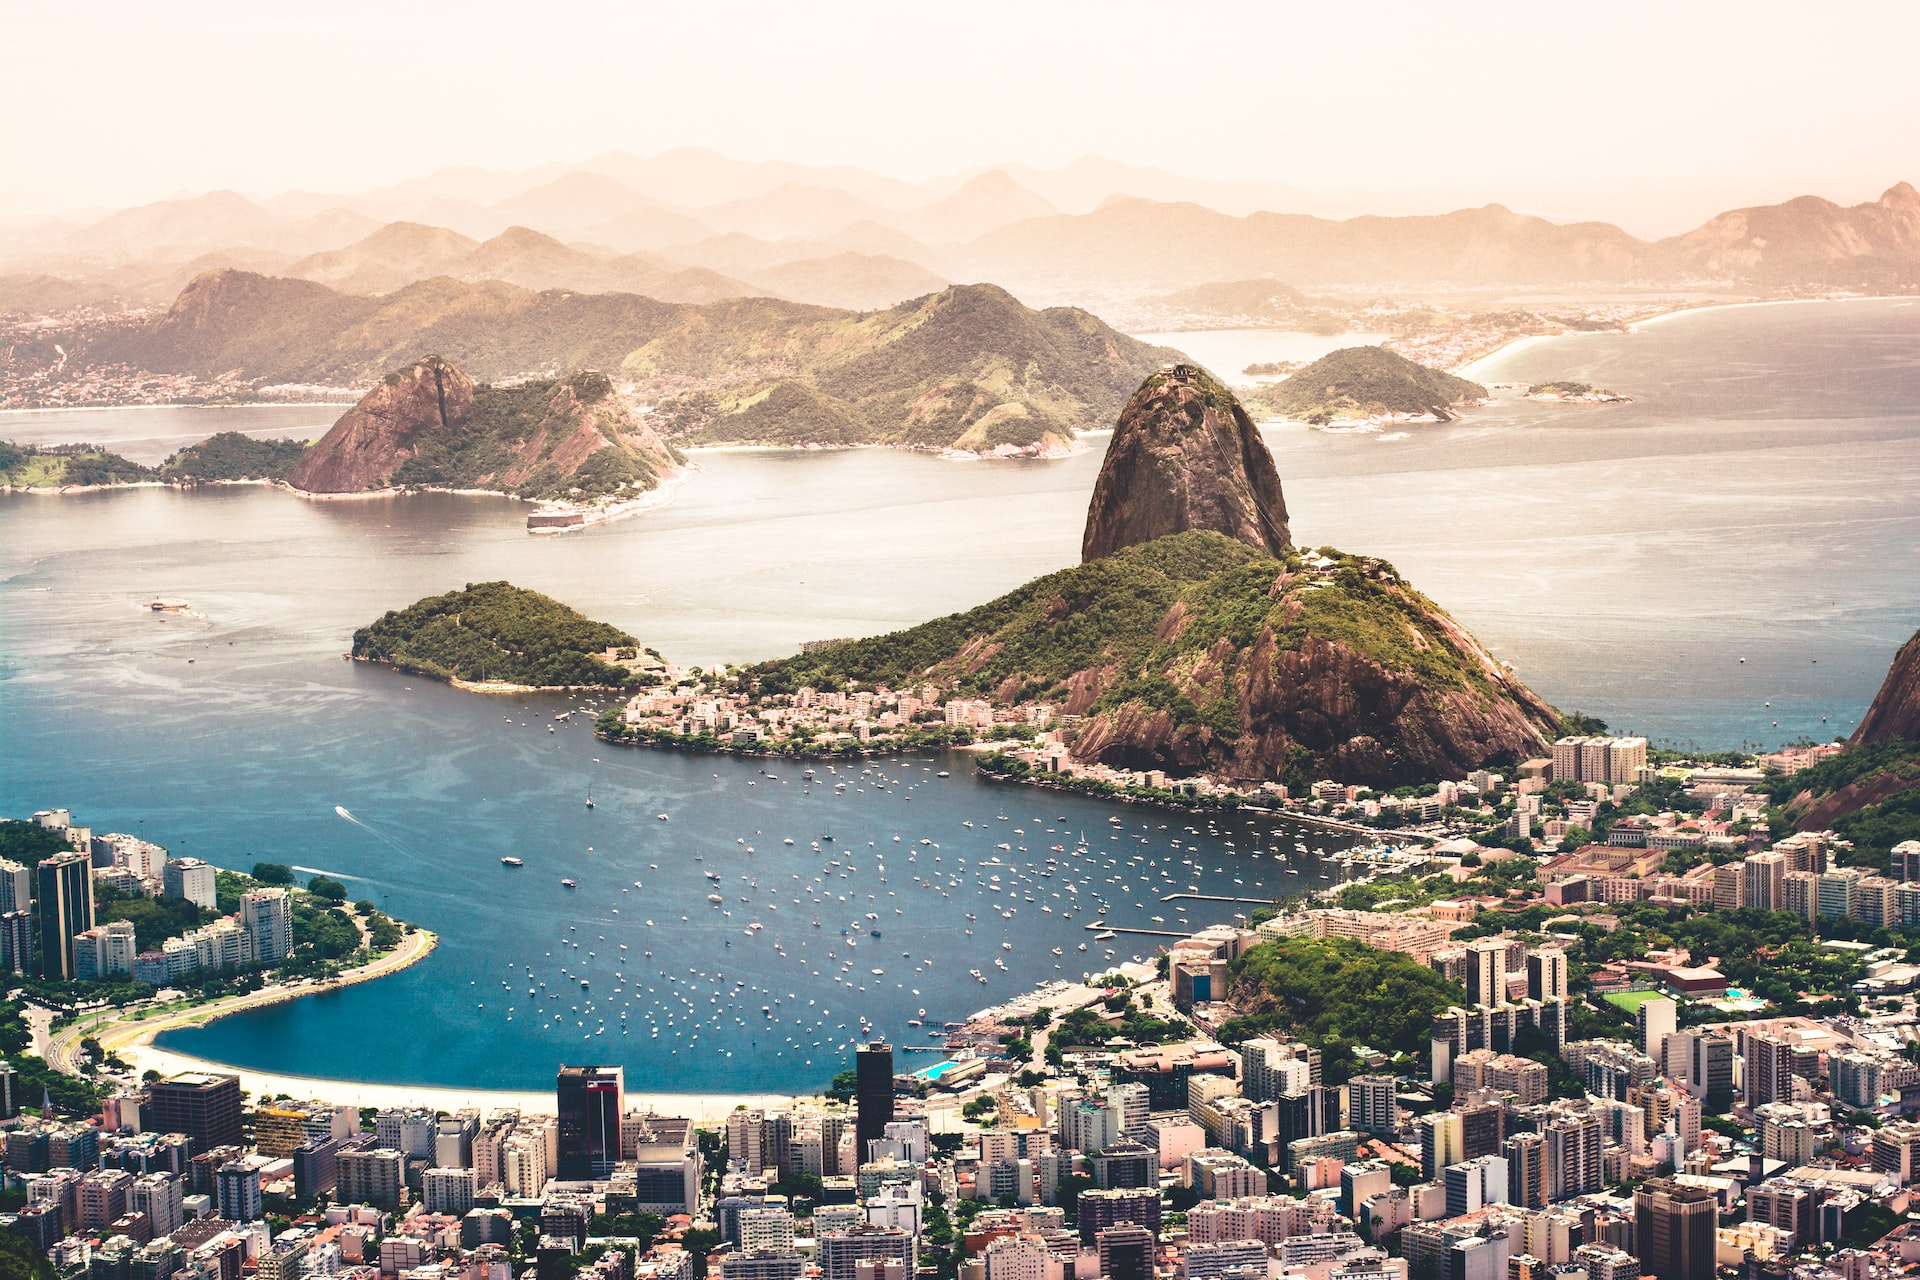 10 Fascinating Facts About Brazil: From the Amazon Rainforest to Football and Renewable Energy